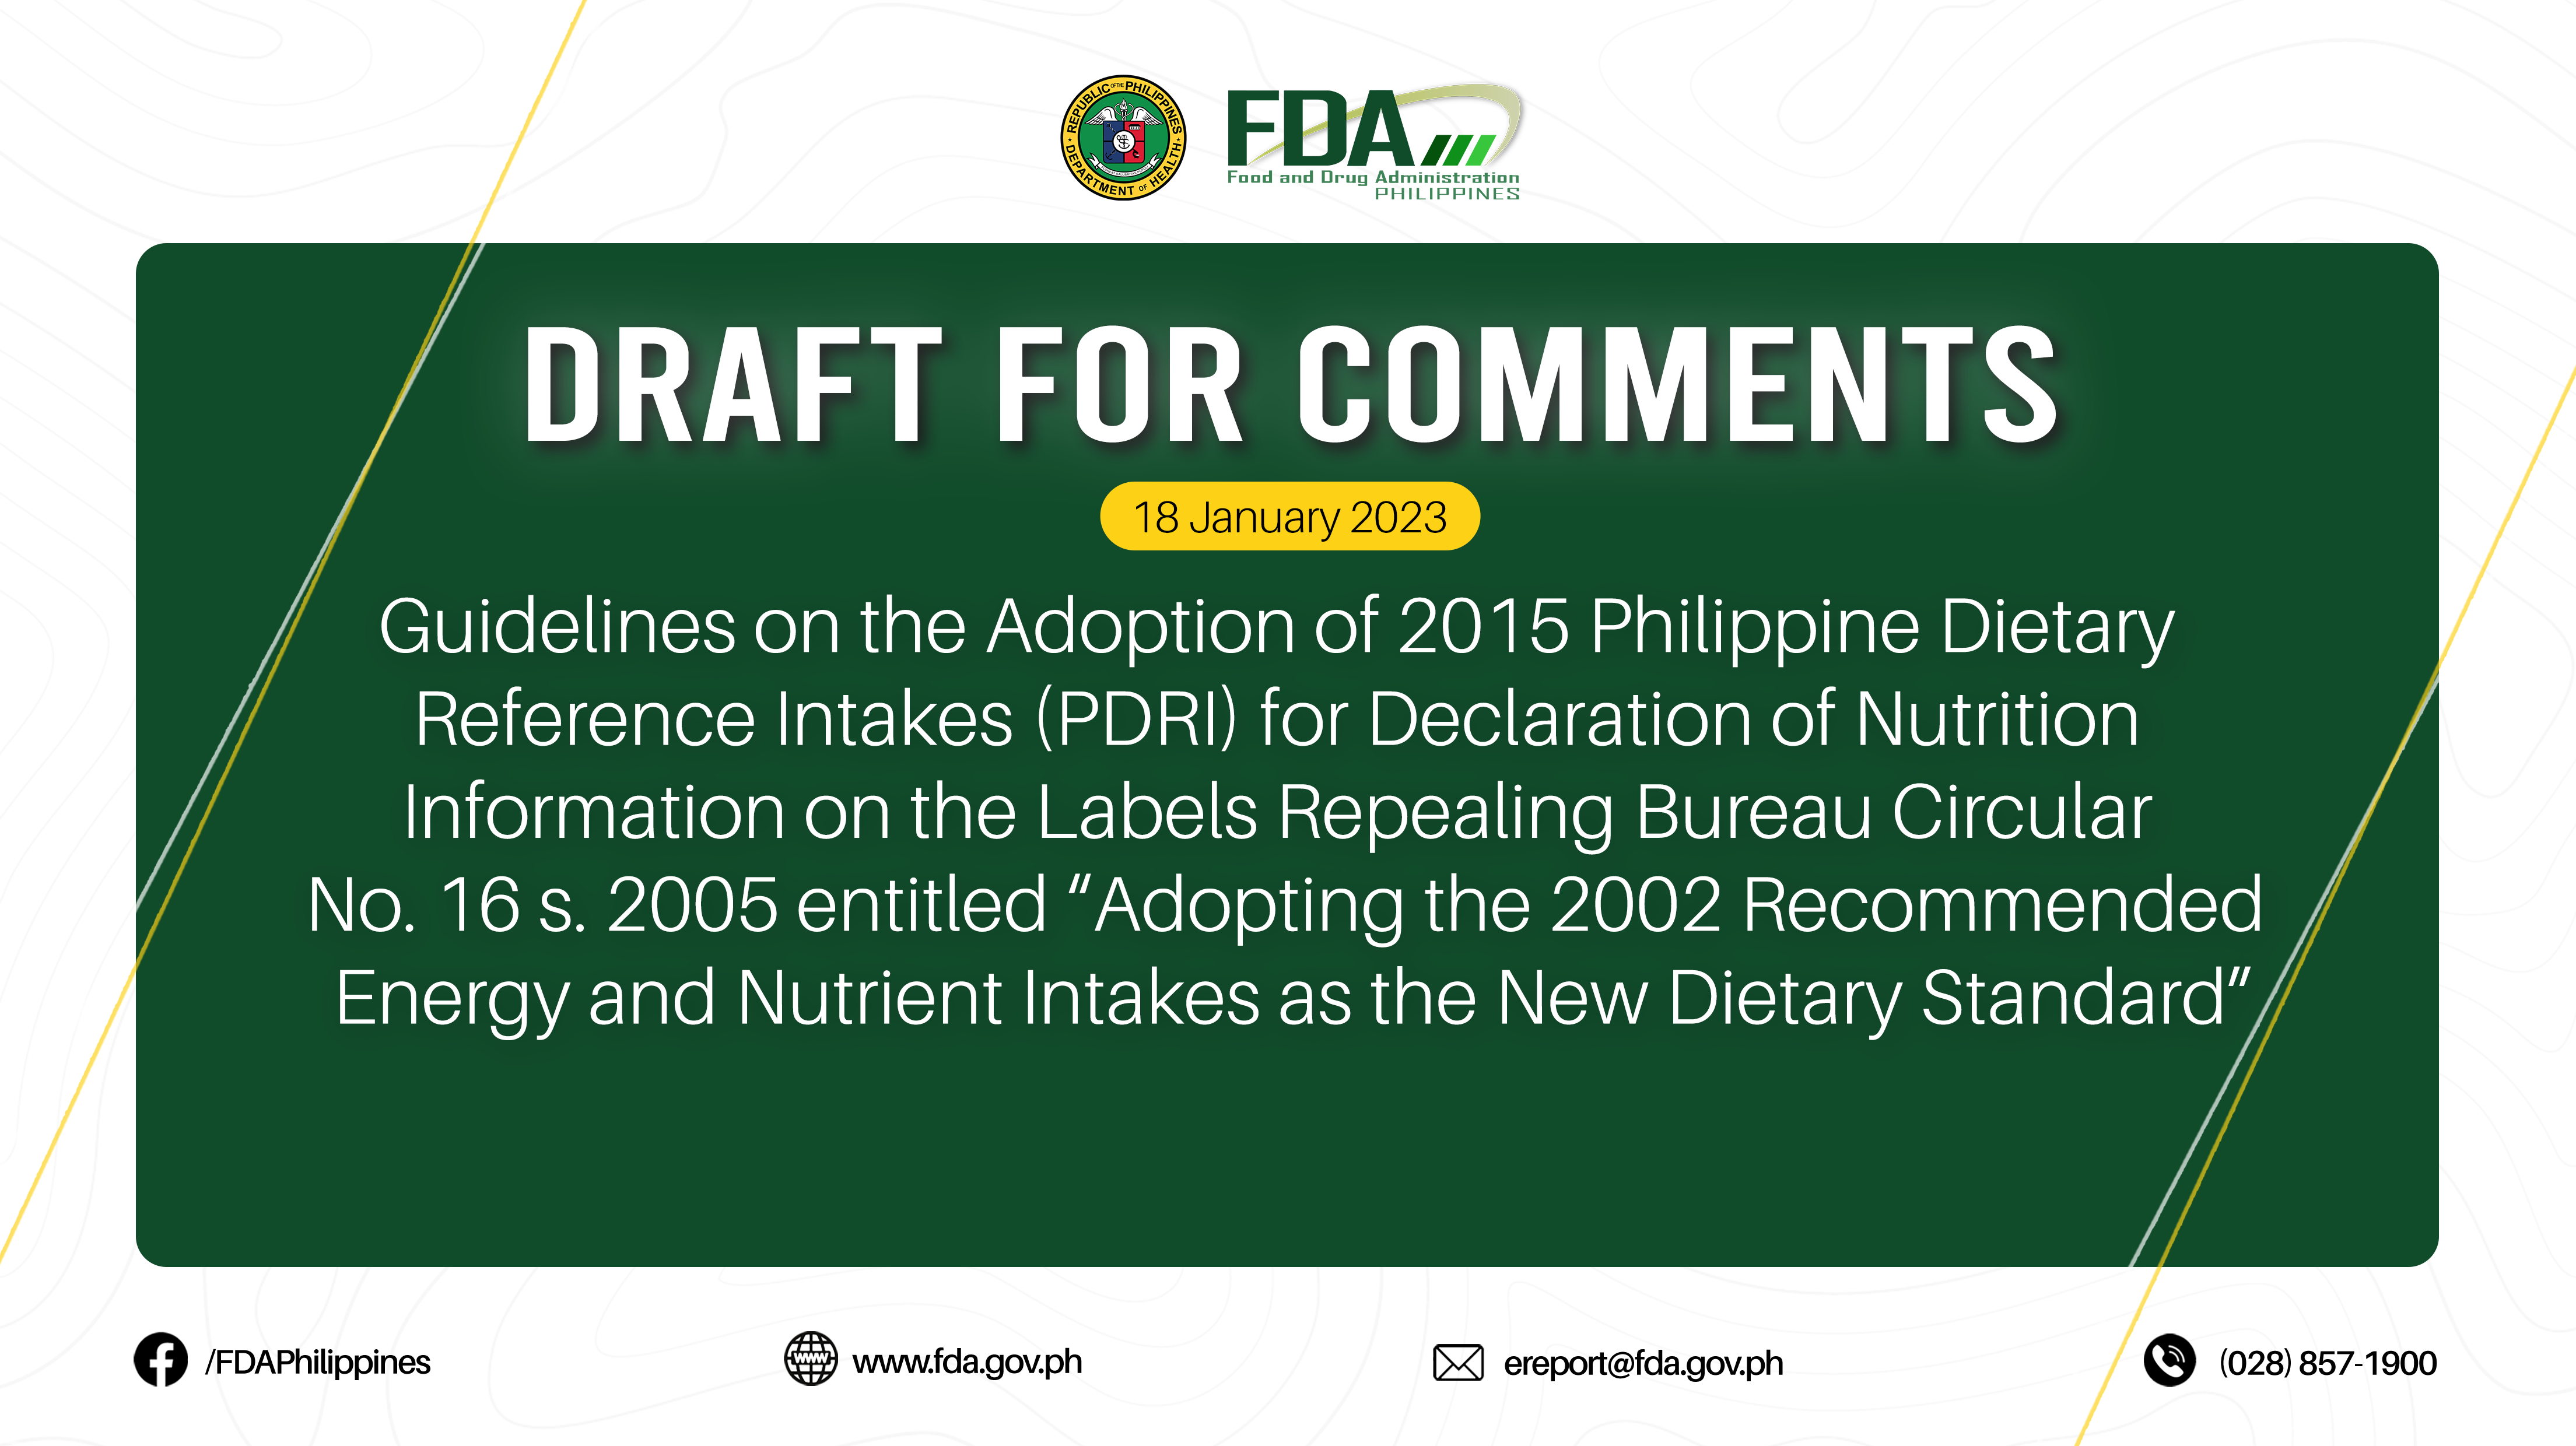 Draft for Comments || Guidelines on the Adoption of 2015 Philippine Dietary Reference Intakes (PDRI) for Declaration of Nutrition Information on the Labels Repealing Bureau Circular No. 16 s. 2005 entitled “Adopting the 2002 Recommended Energy and Nutrient Intakes as the New Dietary Standard”